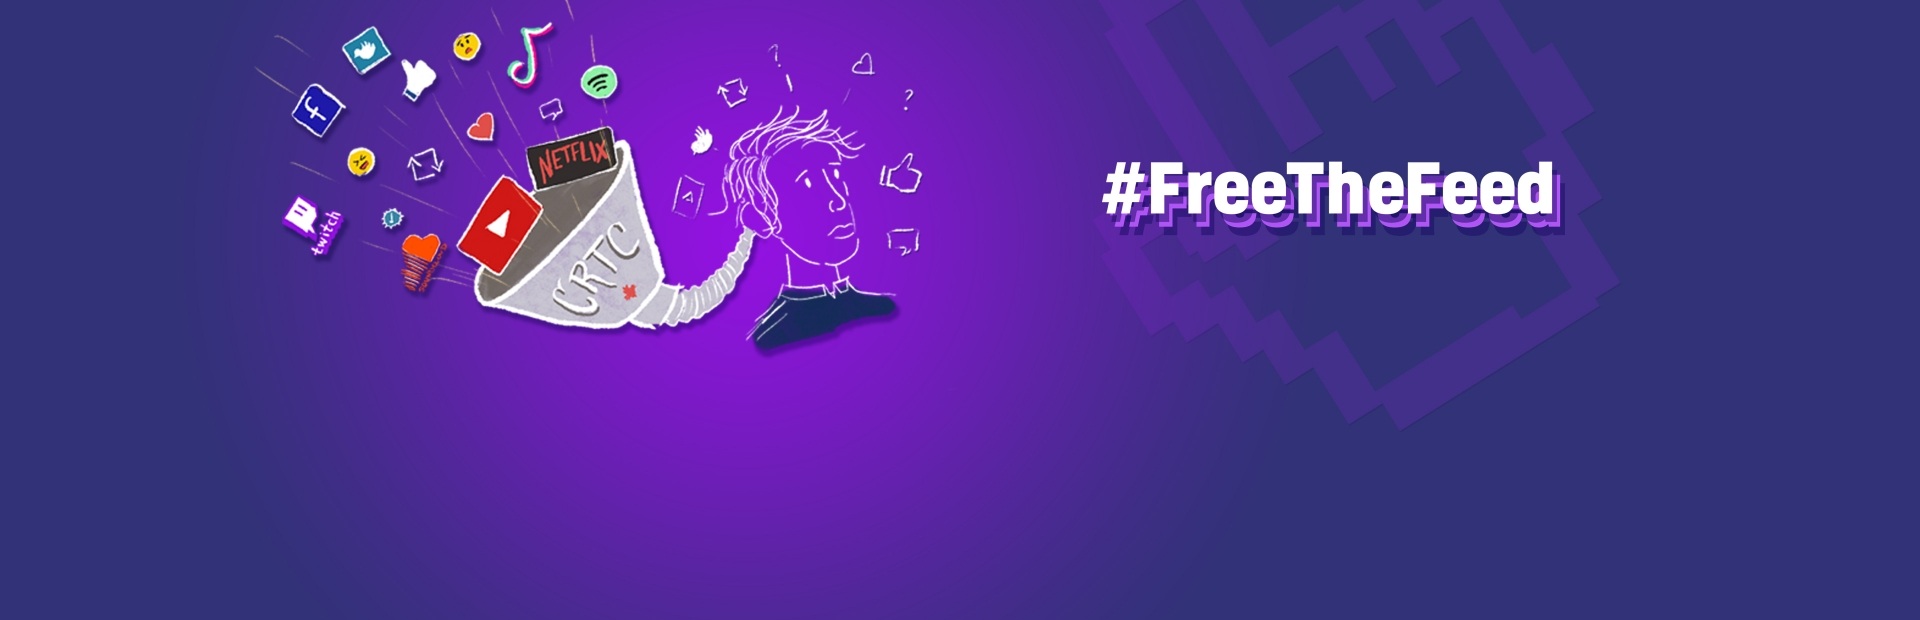 Stop treating the Internet like television: #FreetheFeed!